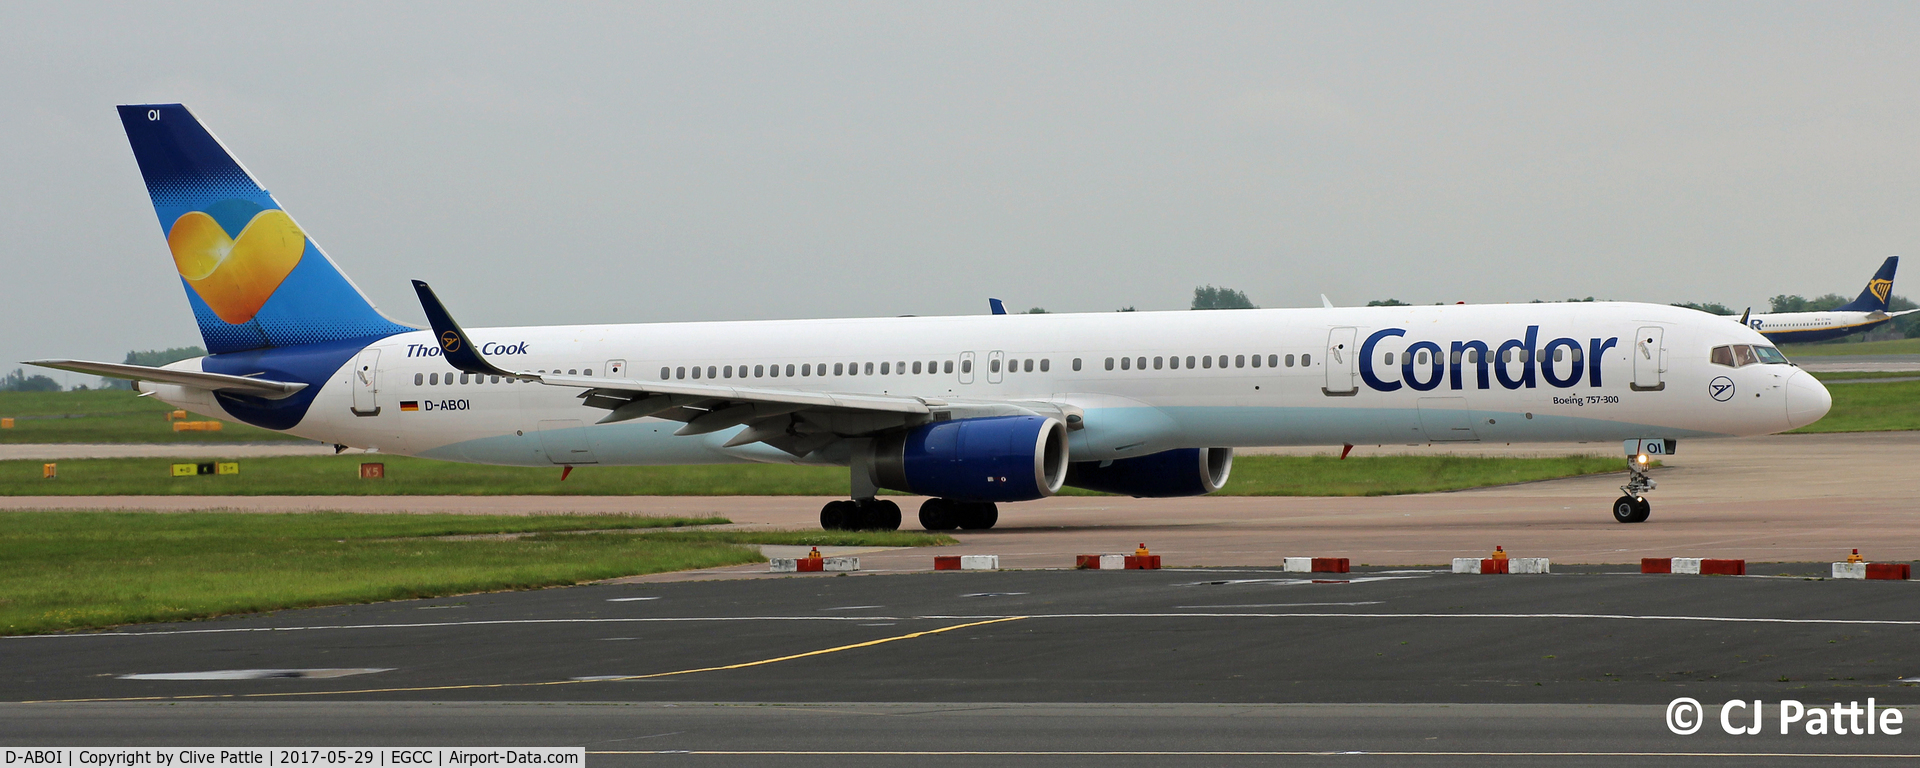 D-ABOI, 2000 Boeing 757-330 C/N 29018, Pictured at Manchester EGCC